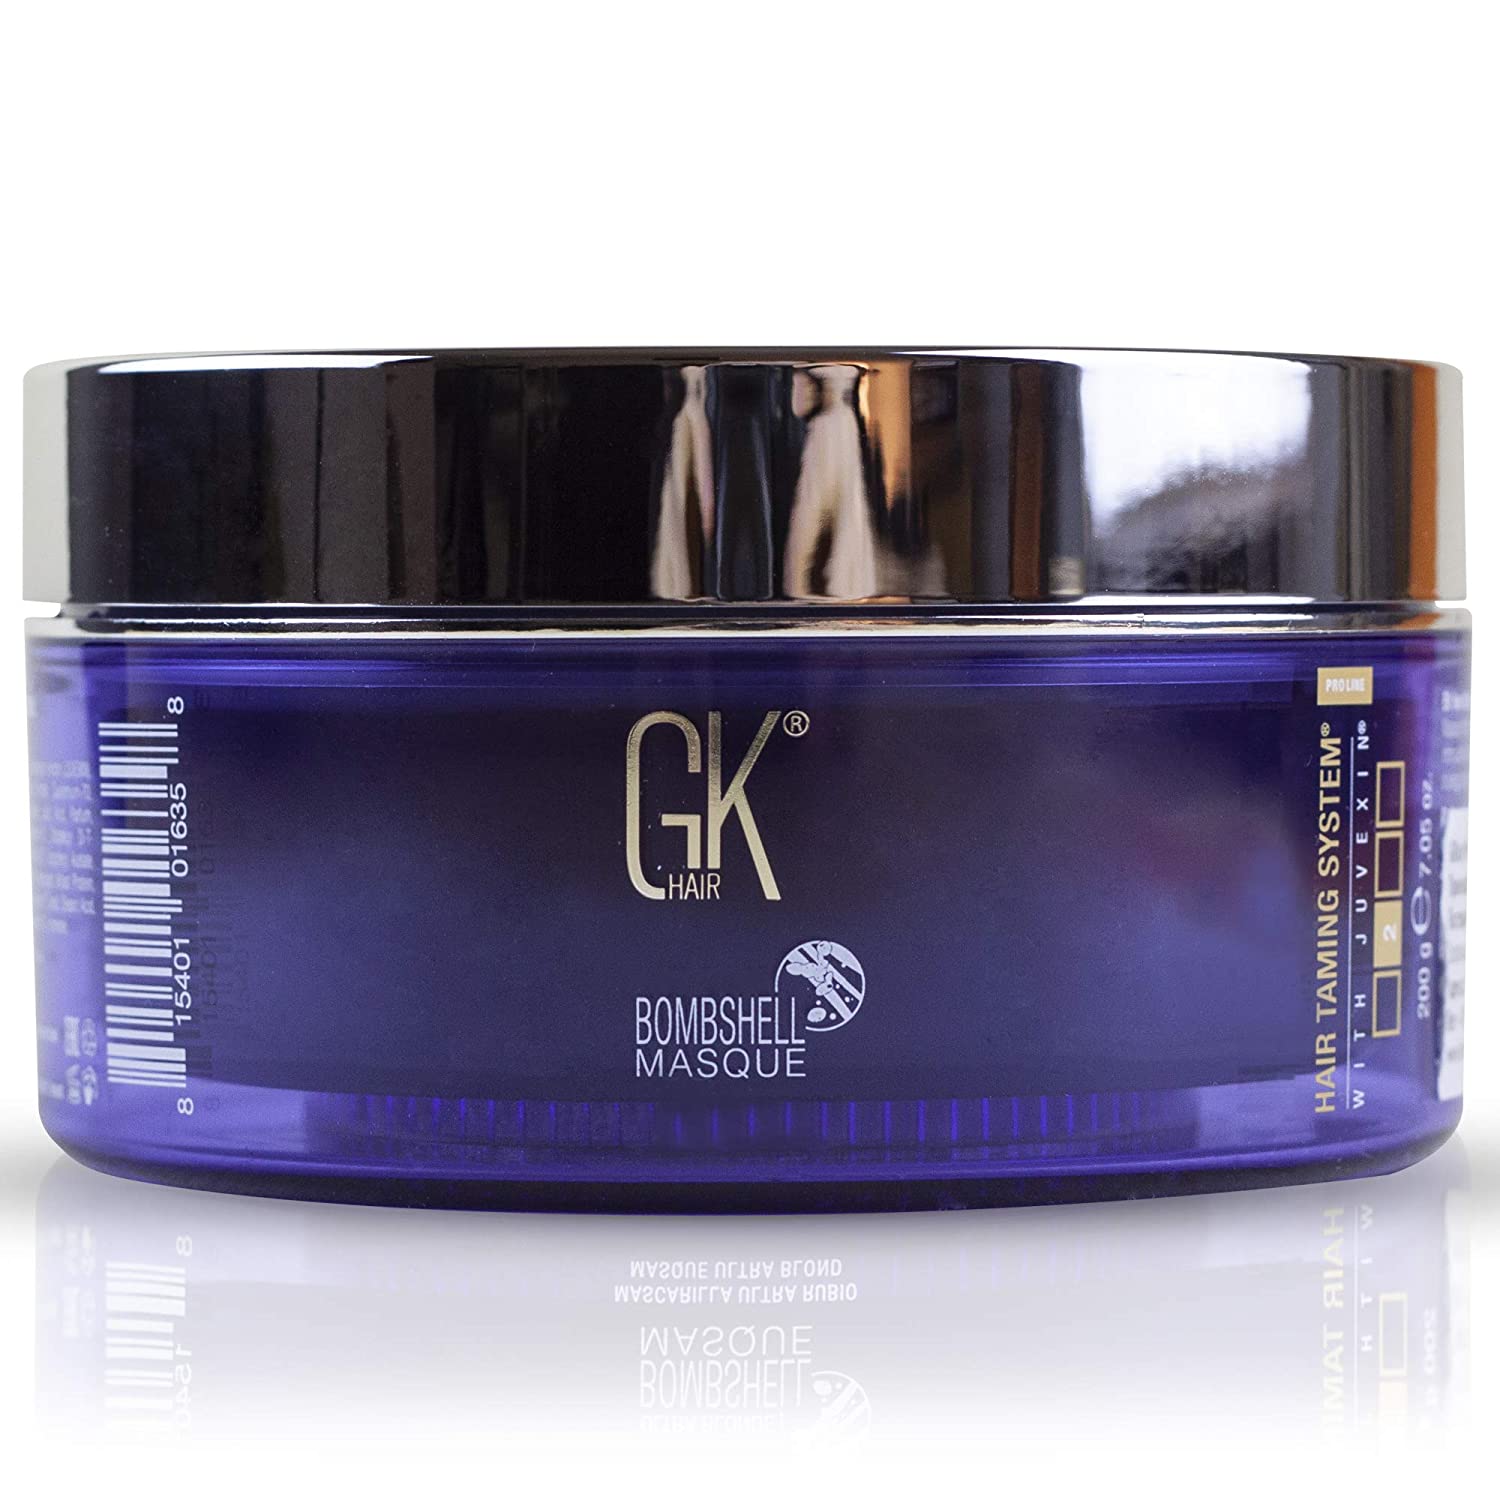 GK HAIR Global Keratin Ultra Blonde Bombshell Masque (7.05 Fl Oz/200 g) Semi-Permanent Long Lasting Hair Toning Color Pigments Moisturizing Styling and Coloring Mask for All Hair Types Unisex - image 1 of 7